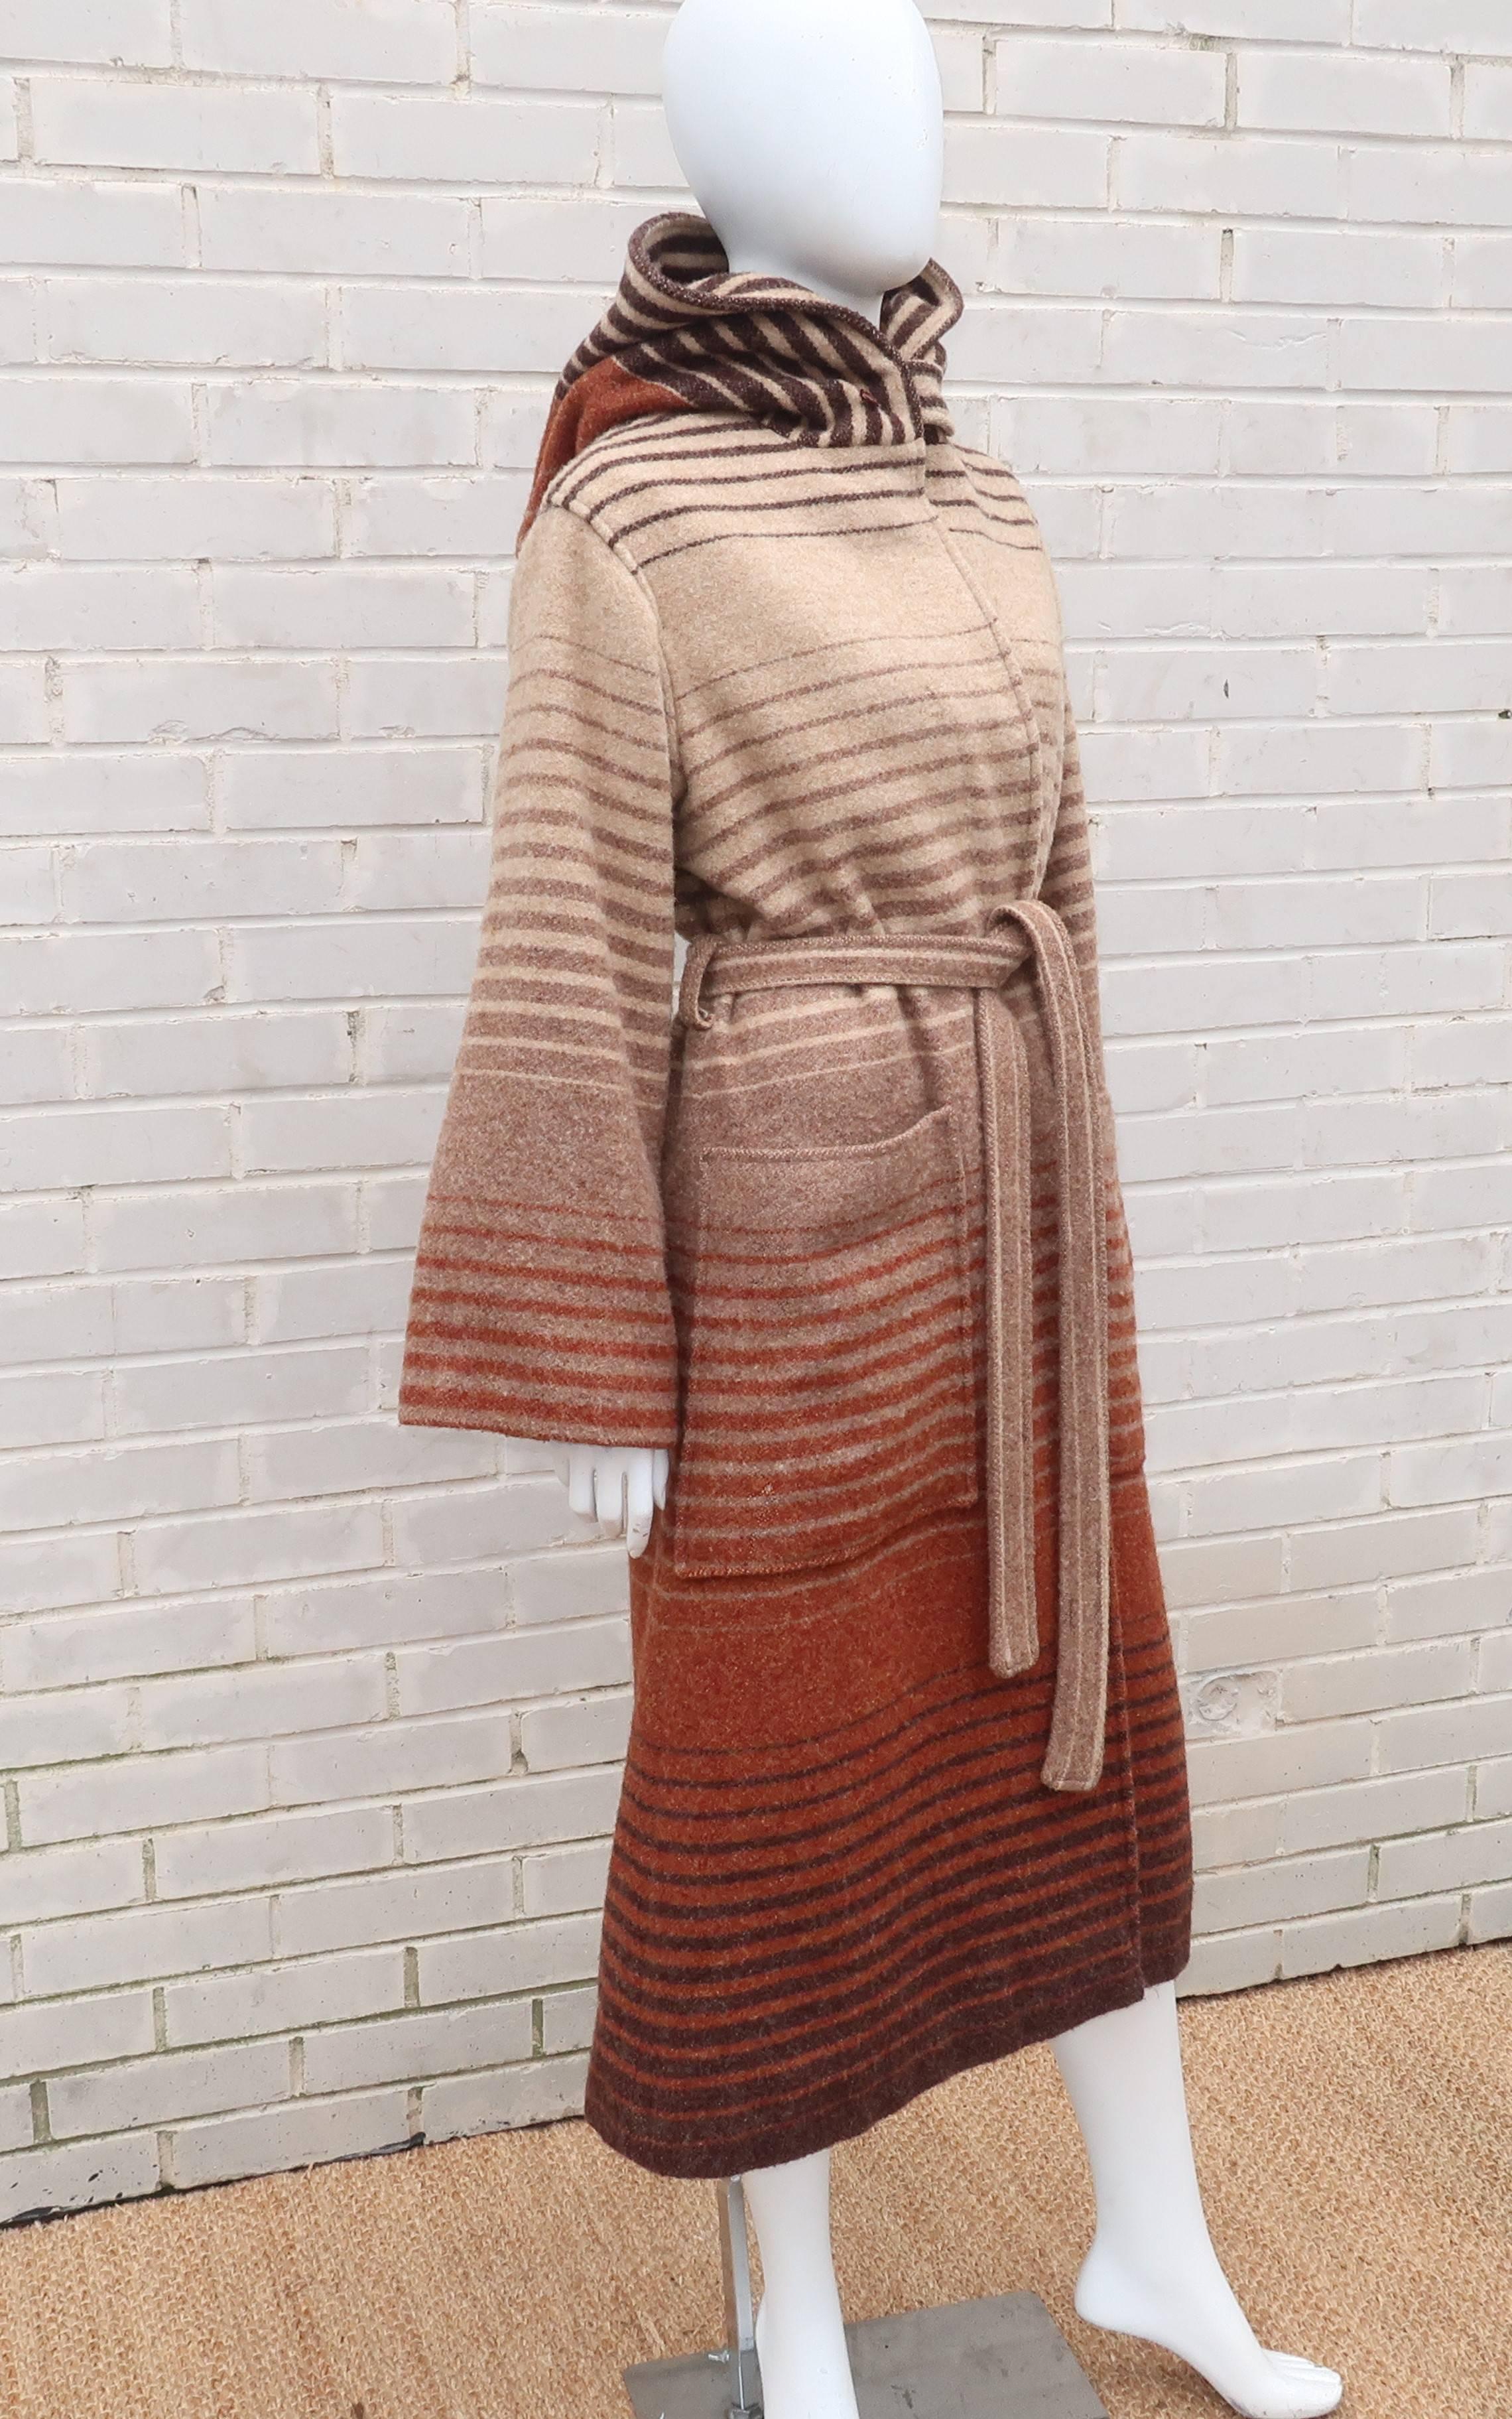 There is something decidedly Obi-Wan Kenobi about this 1970’s Luba coat.  Star Wars may not have been the inspiration but the cloak style silhouette, including the hood, sash belt and bell sleeves, certainly lend themselves to the fashion of an era